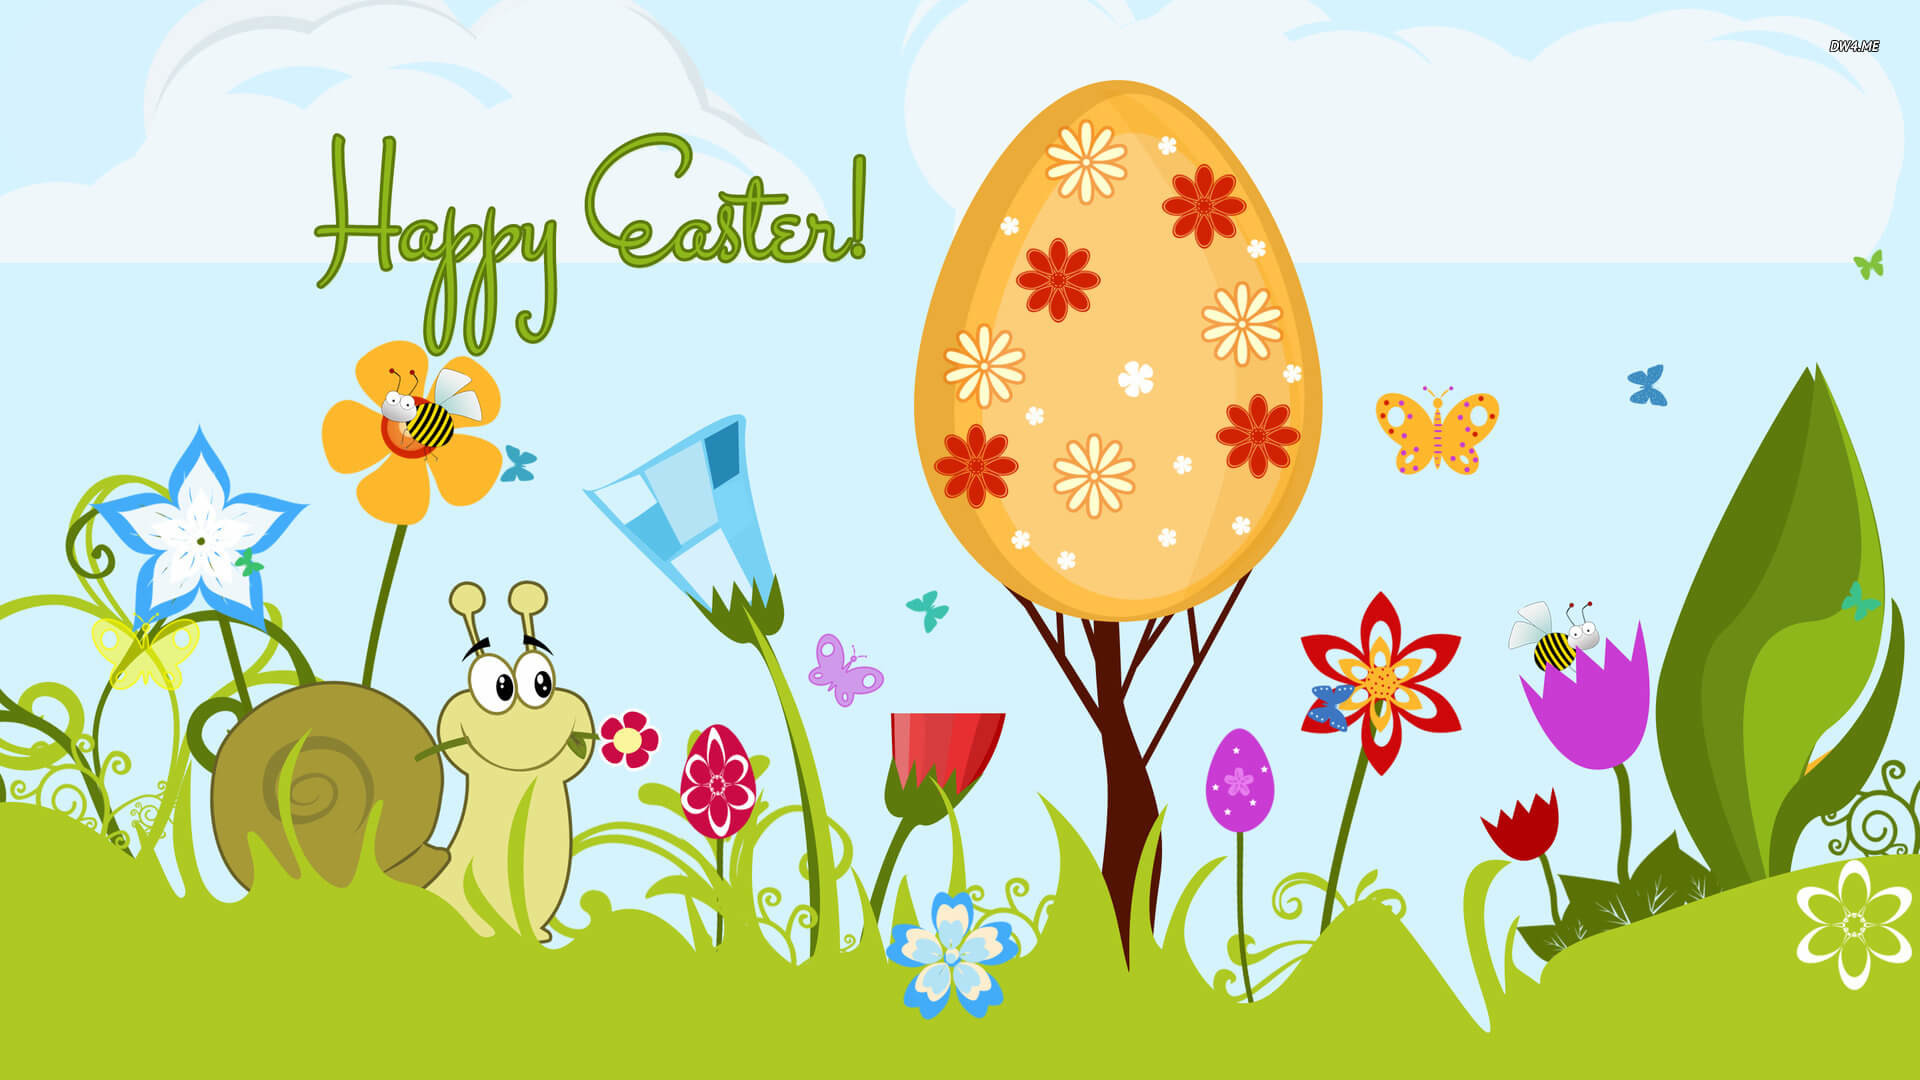 1920x1080 ... Snoopy Easter Wallpaper For Computer www topsimages com